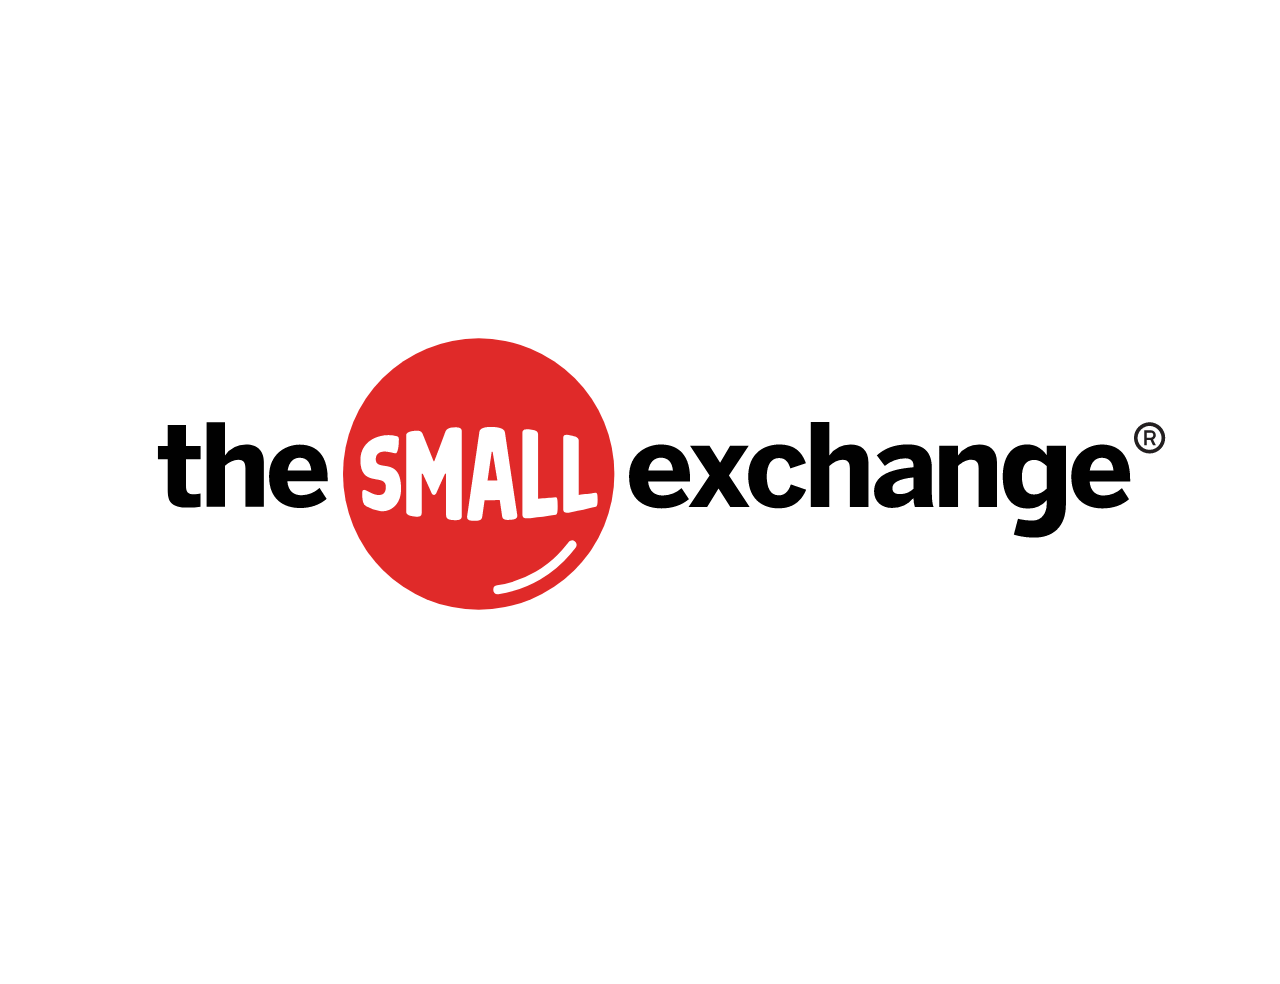 IG 集团回购 Small Exchange